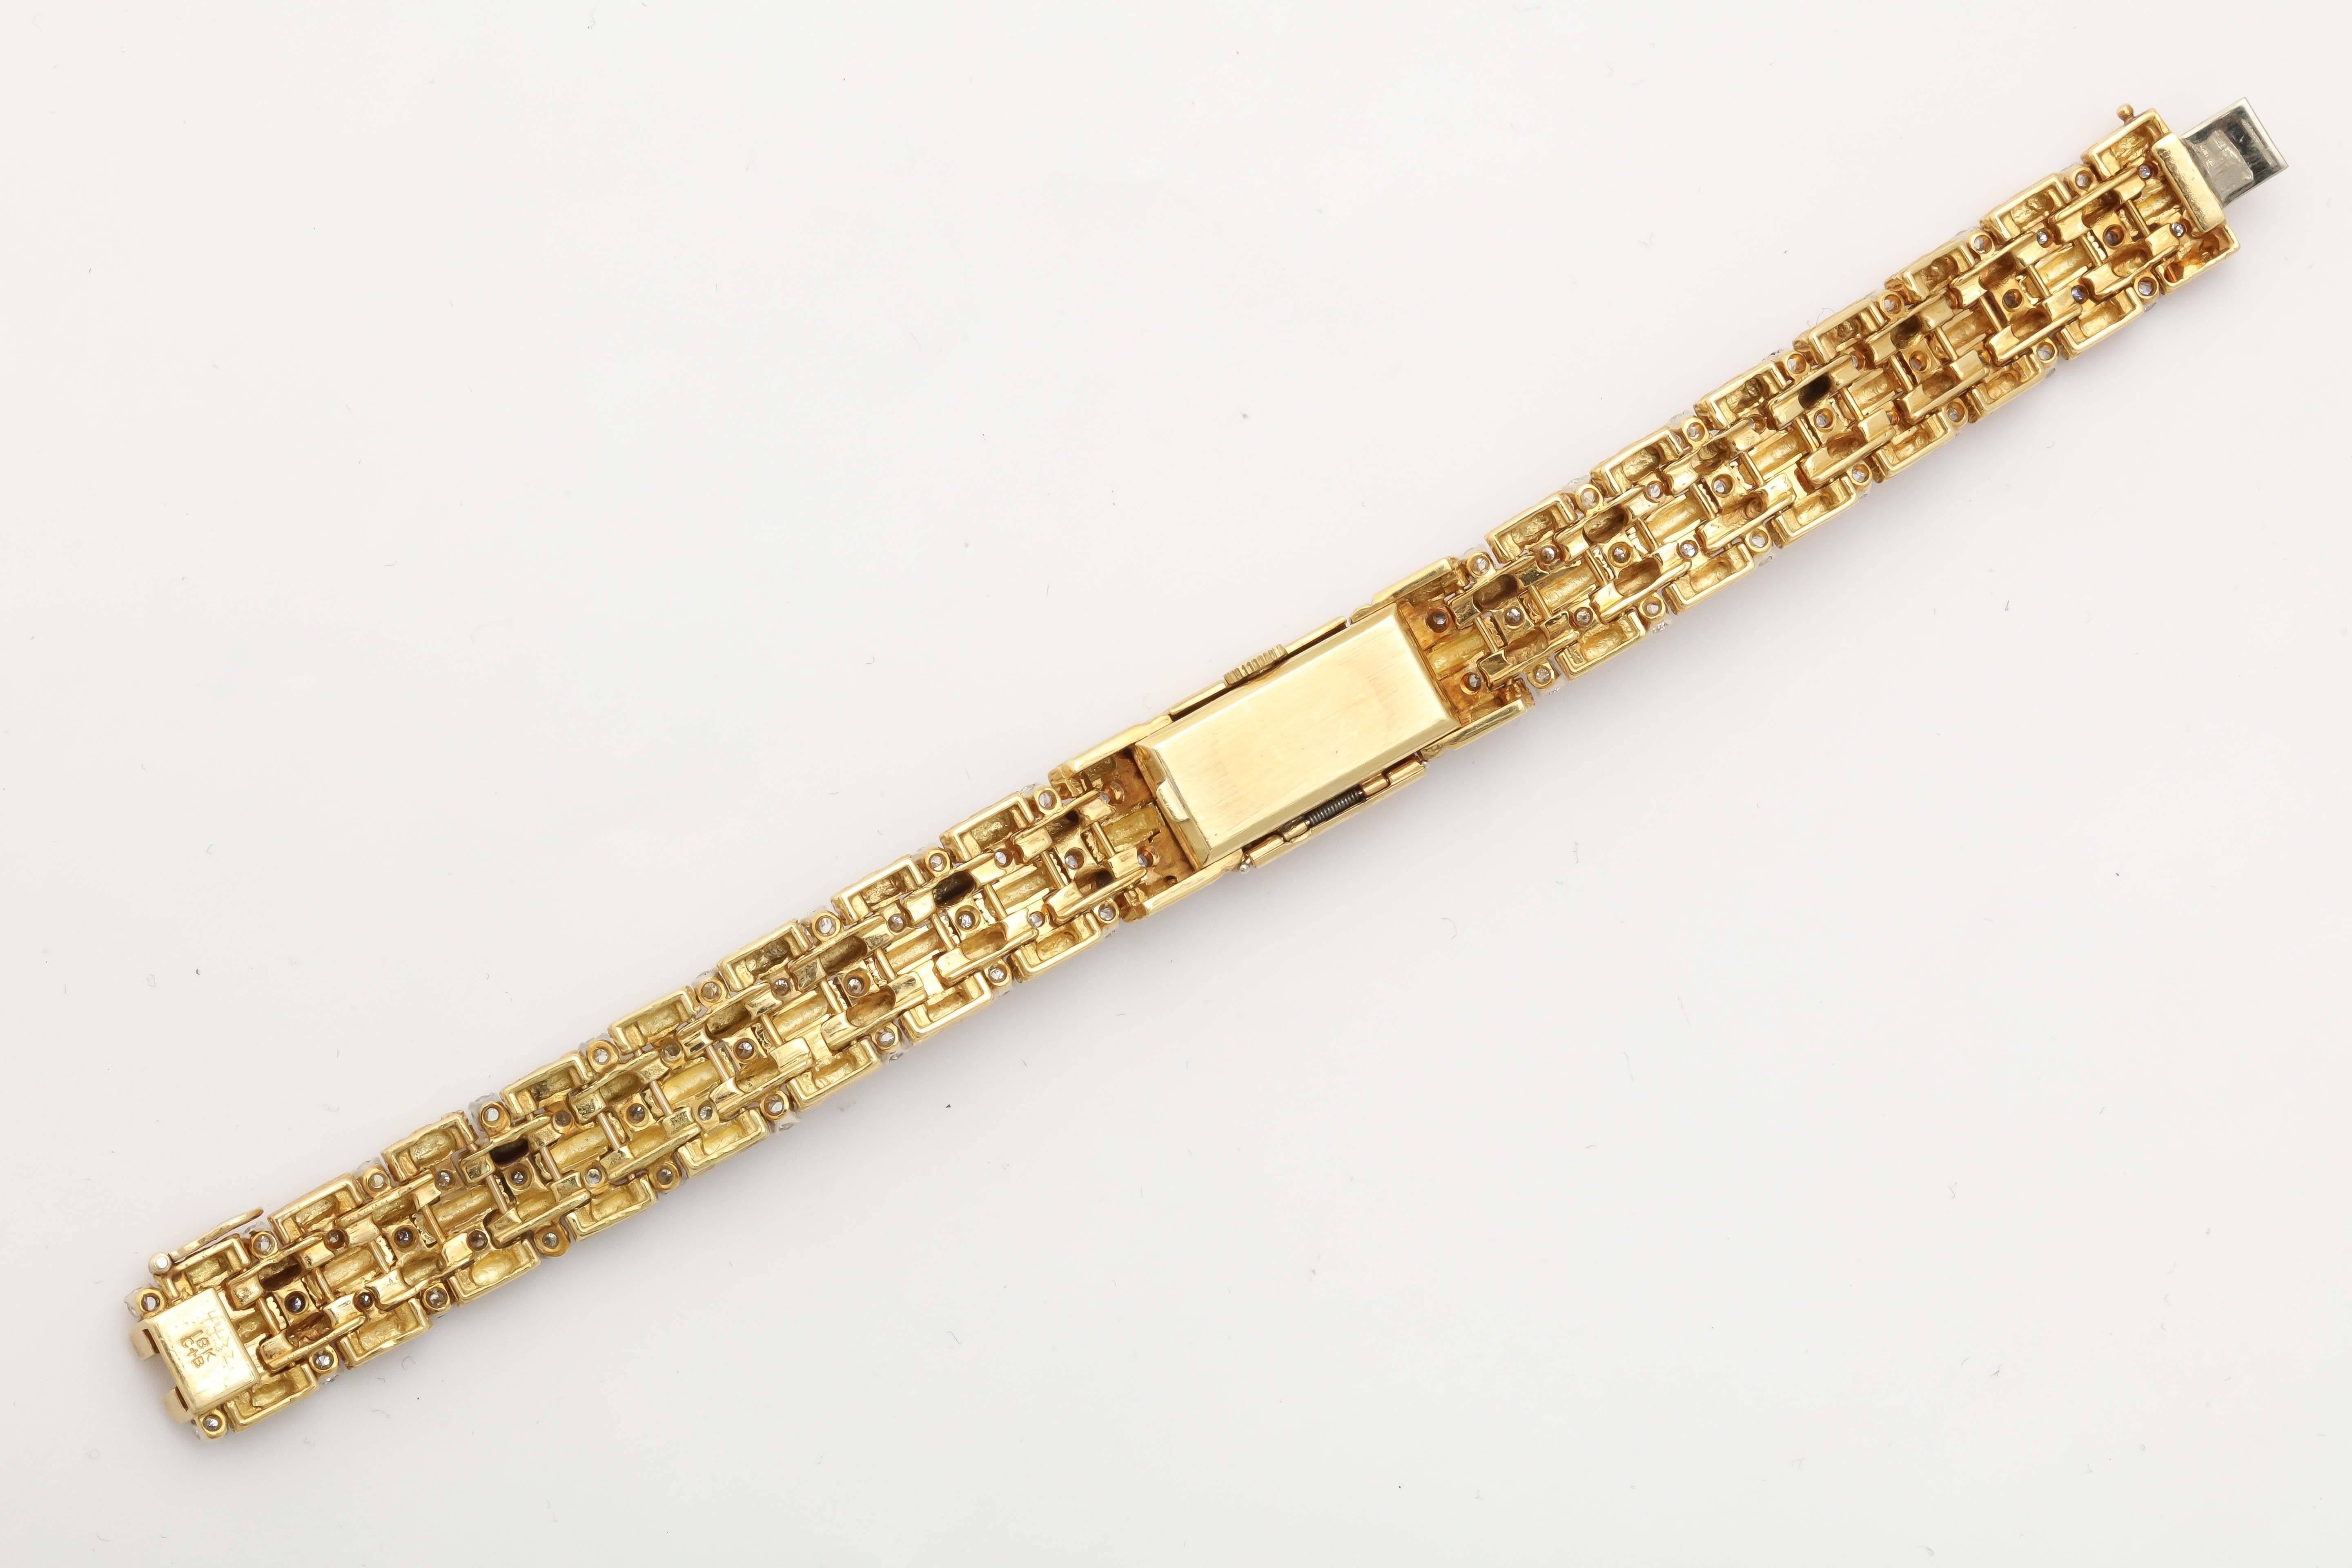 Stylish 18kt Yellow Gold watch Bracelet set with alternating rows of full cut clean and white Diamonds.  Watch face bearing Tiffany & Co. label and  baton markers.  Total of 96 Diamonds. totaling approximately 3 carats.
